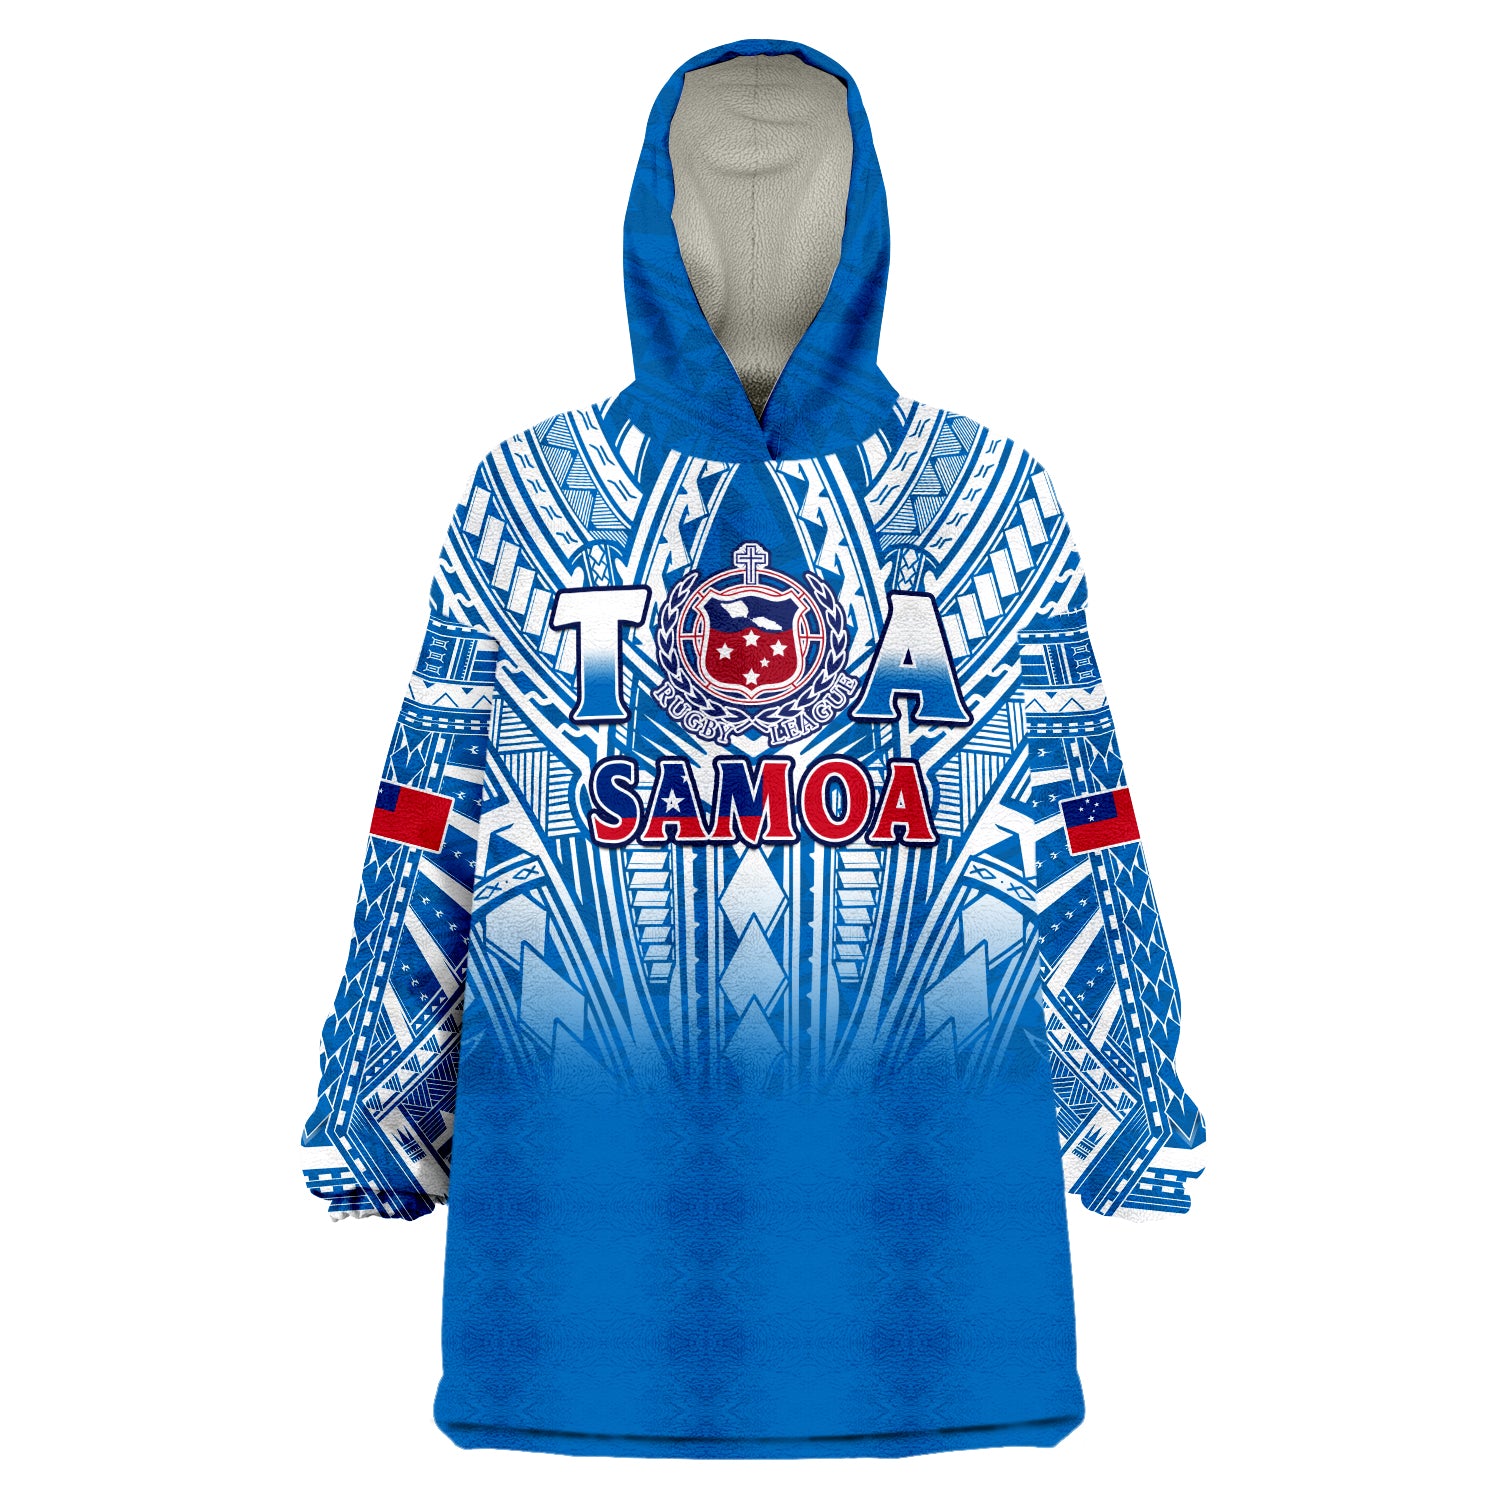 custom-text-and-number-samoa-rugby-toa-samoa-polynesian-pacific-blue-version-wearable-blanket-hoodie